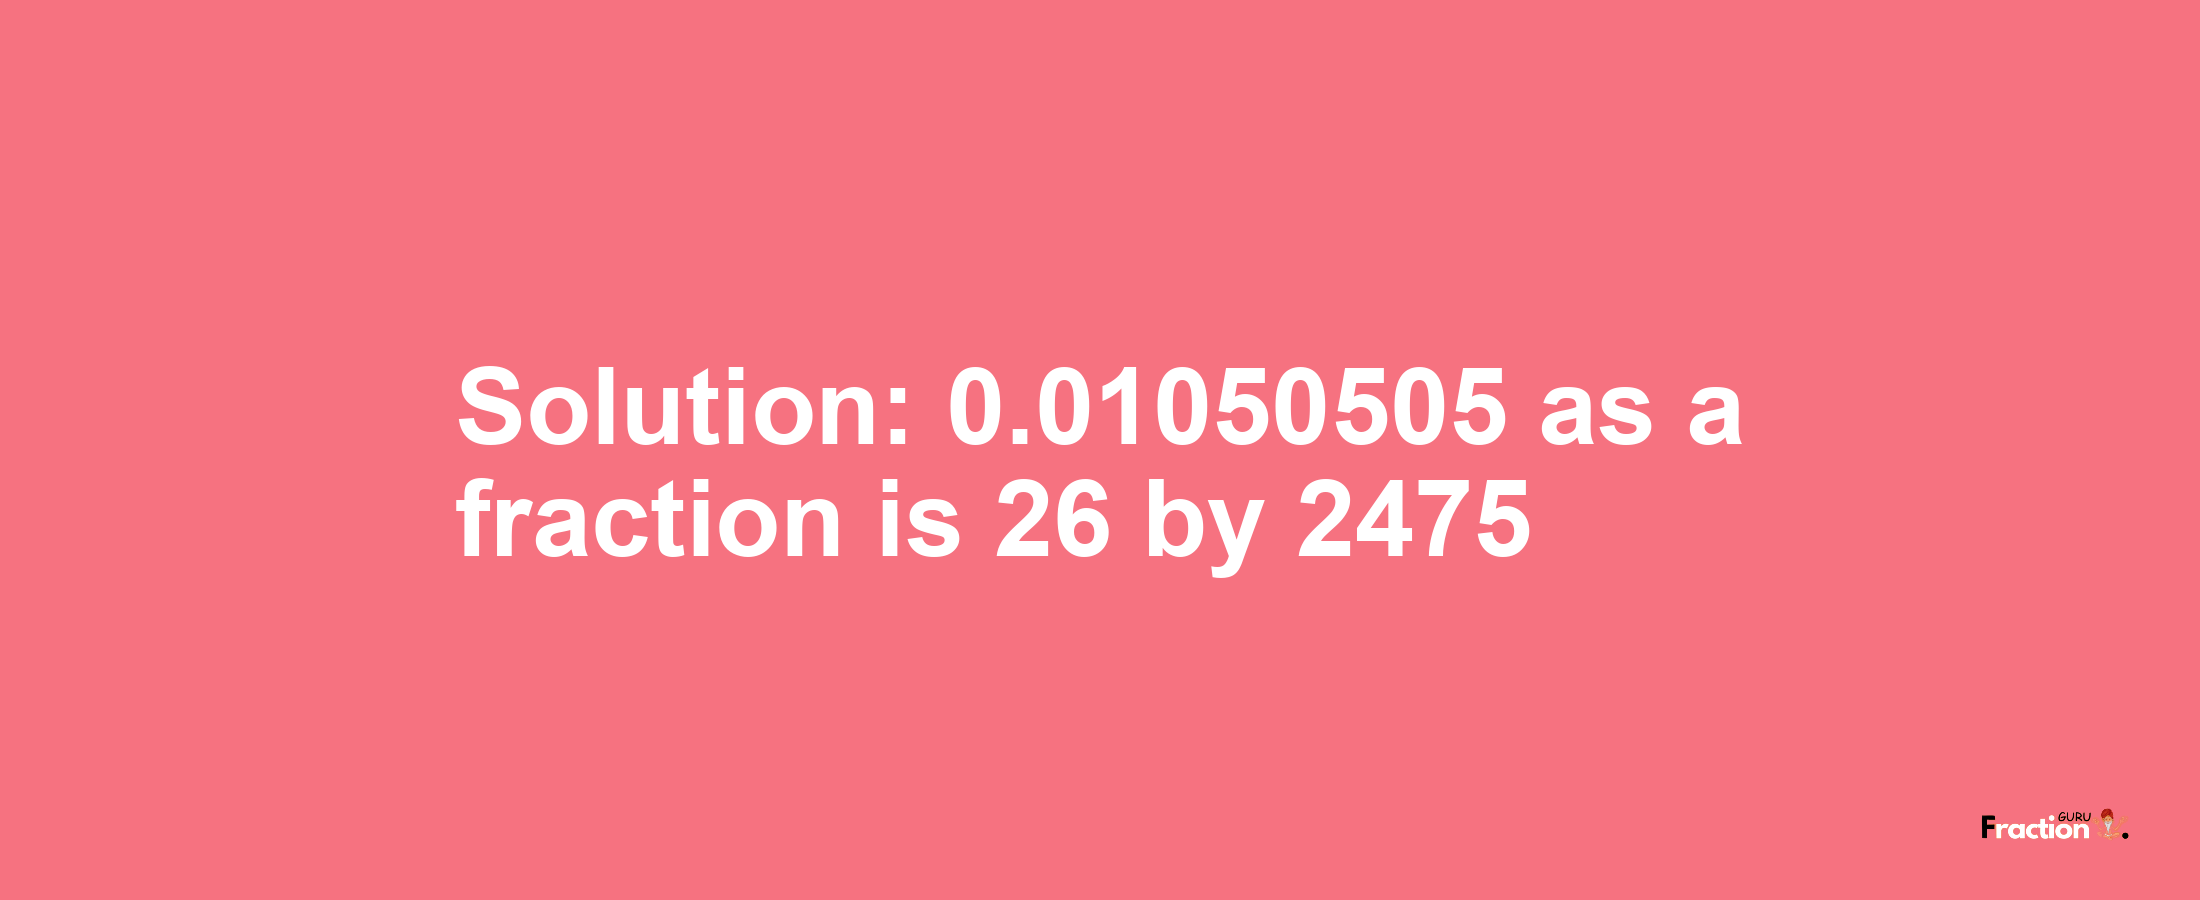 Solution:0.01050505 as a fraction is 26/2475